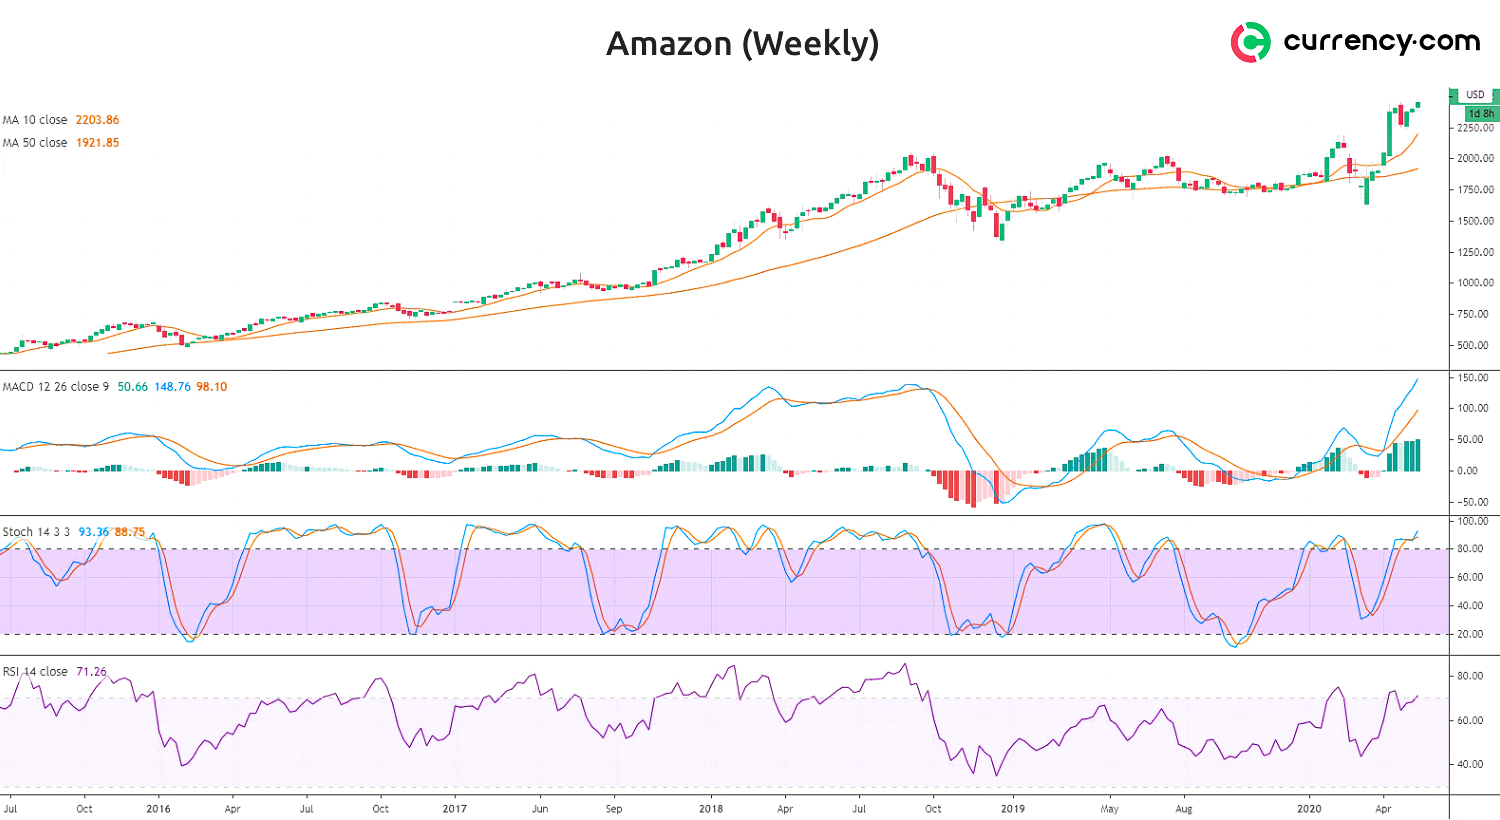 Amazon stock analysis for June technicals point to higher prices